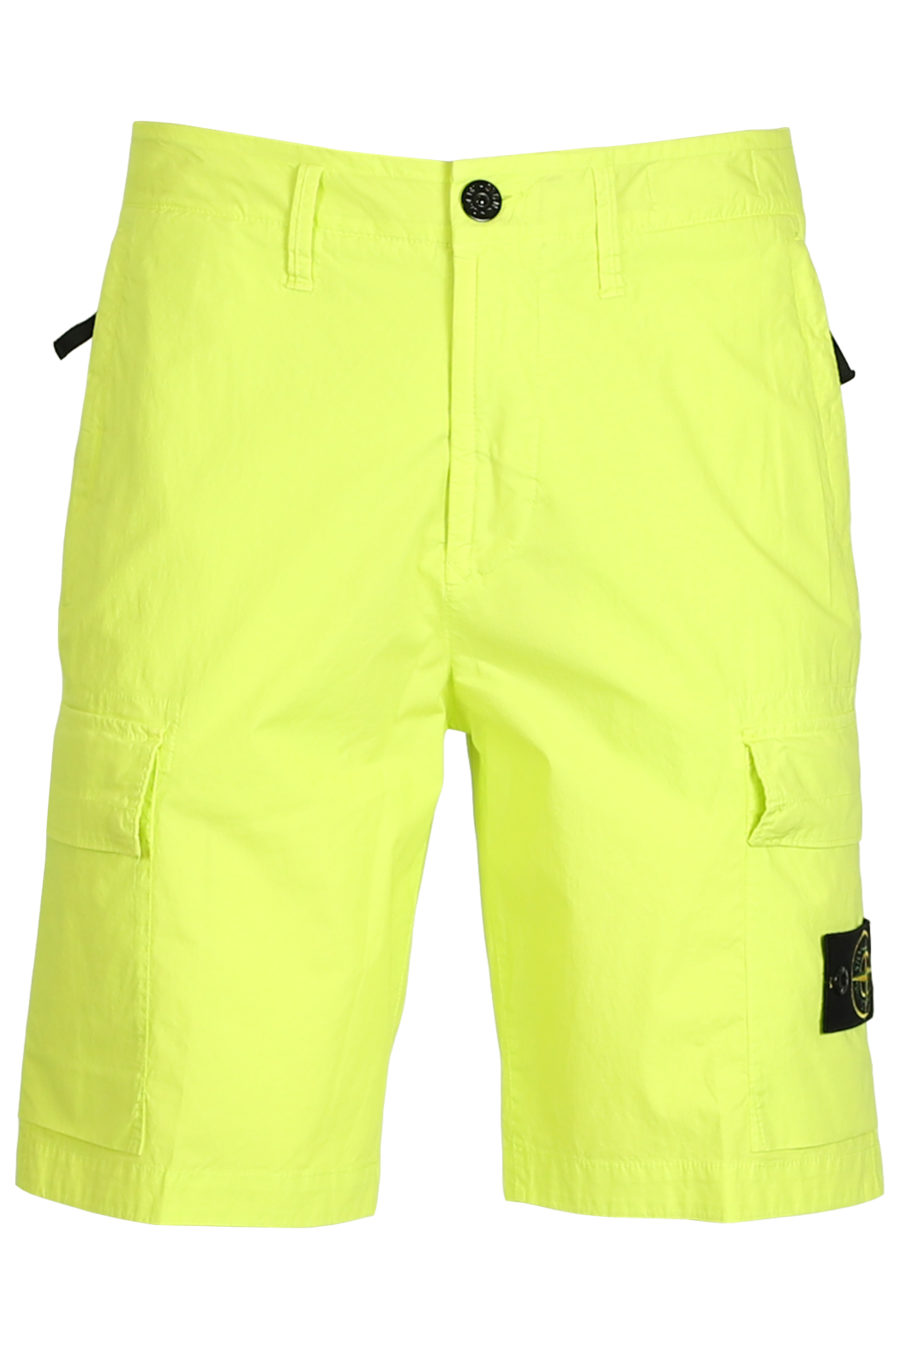 Lime green shorts - IMG 3763